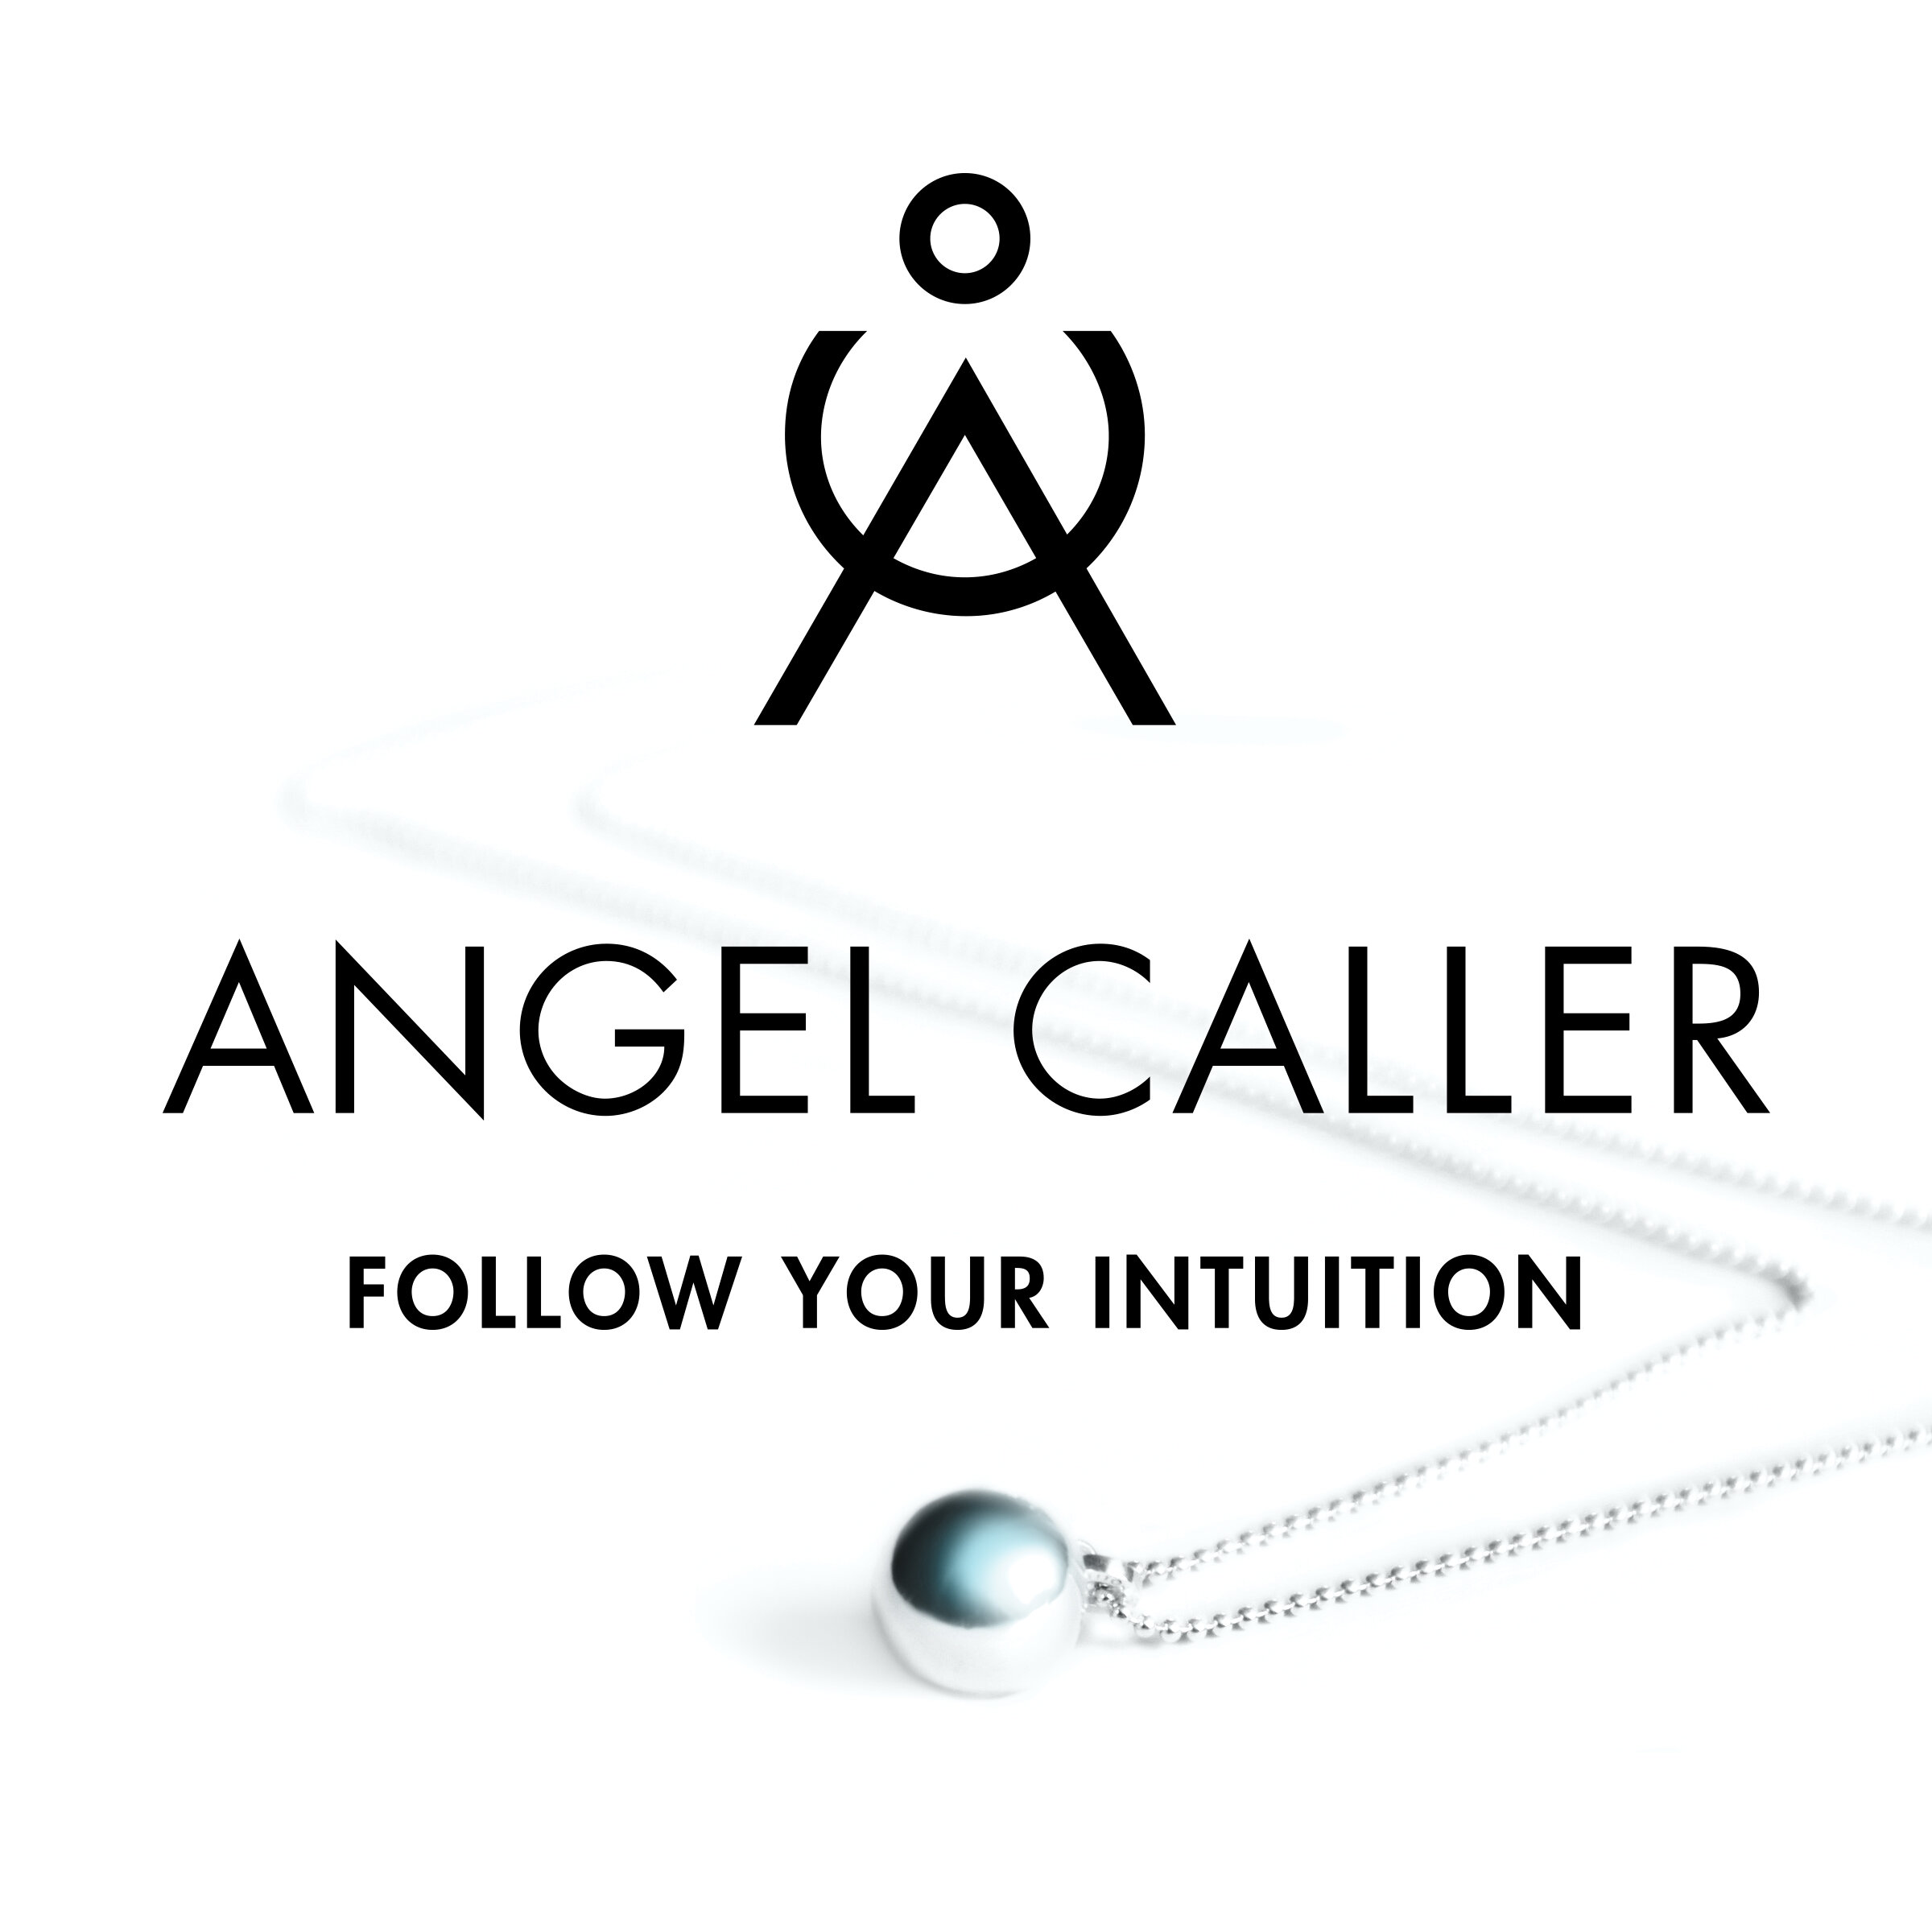 The Italian Sterling Silver Angel Caller Chime Necklace